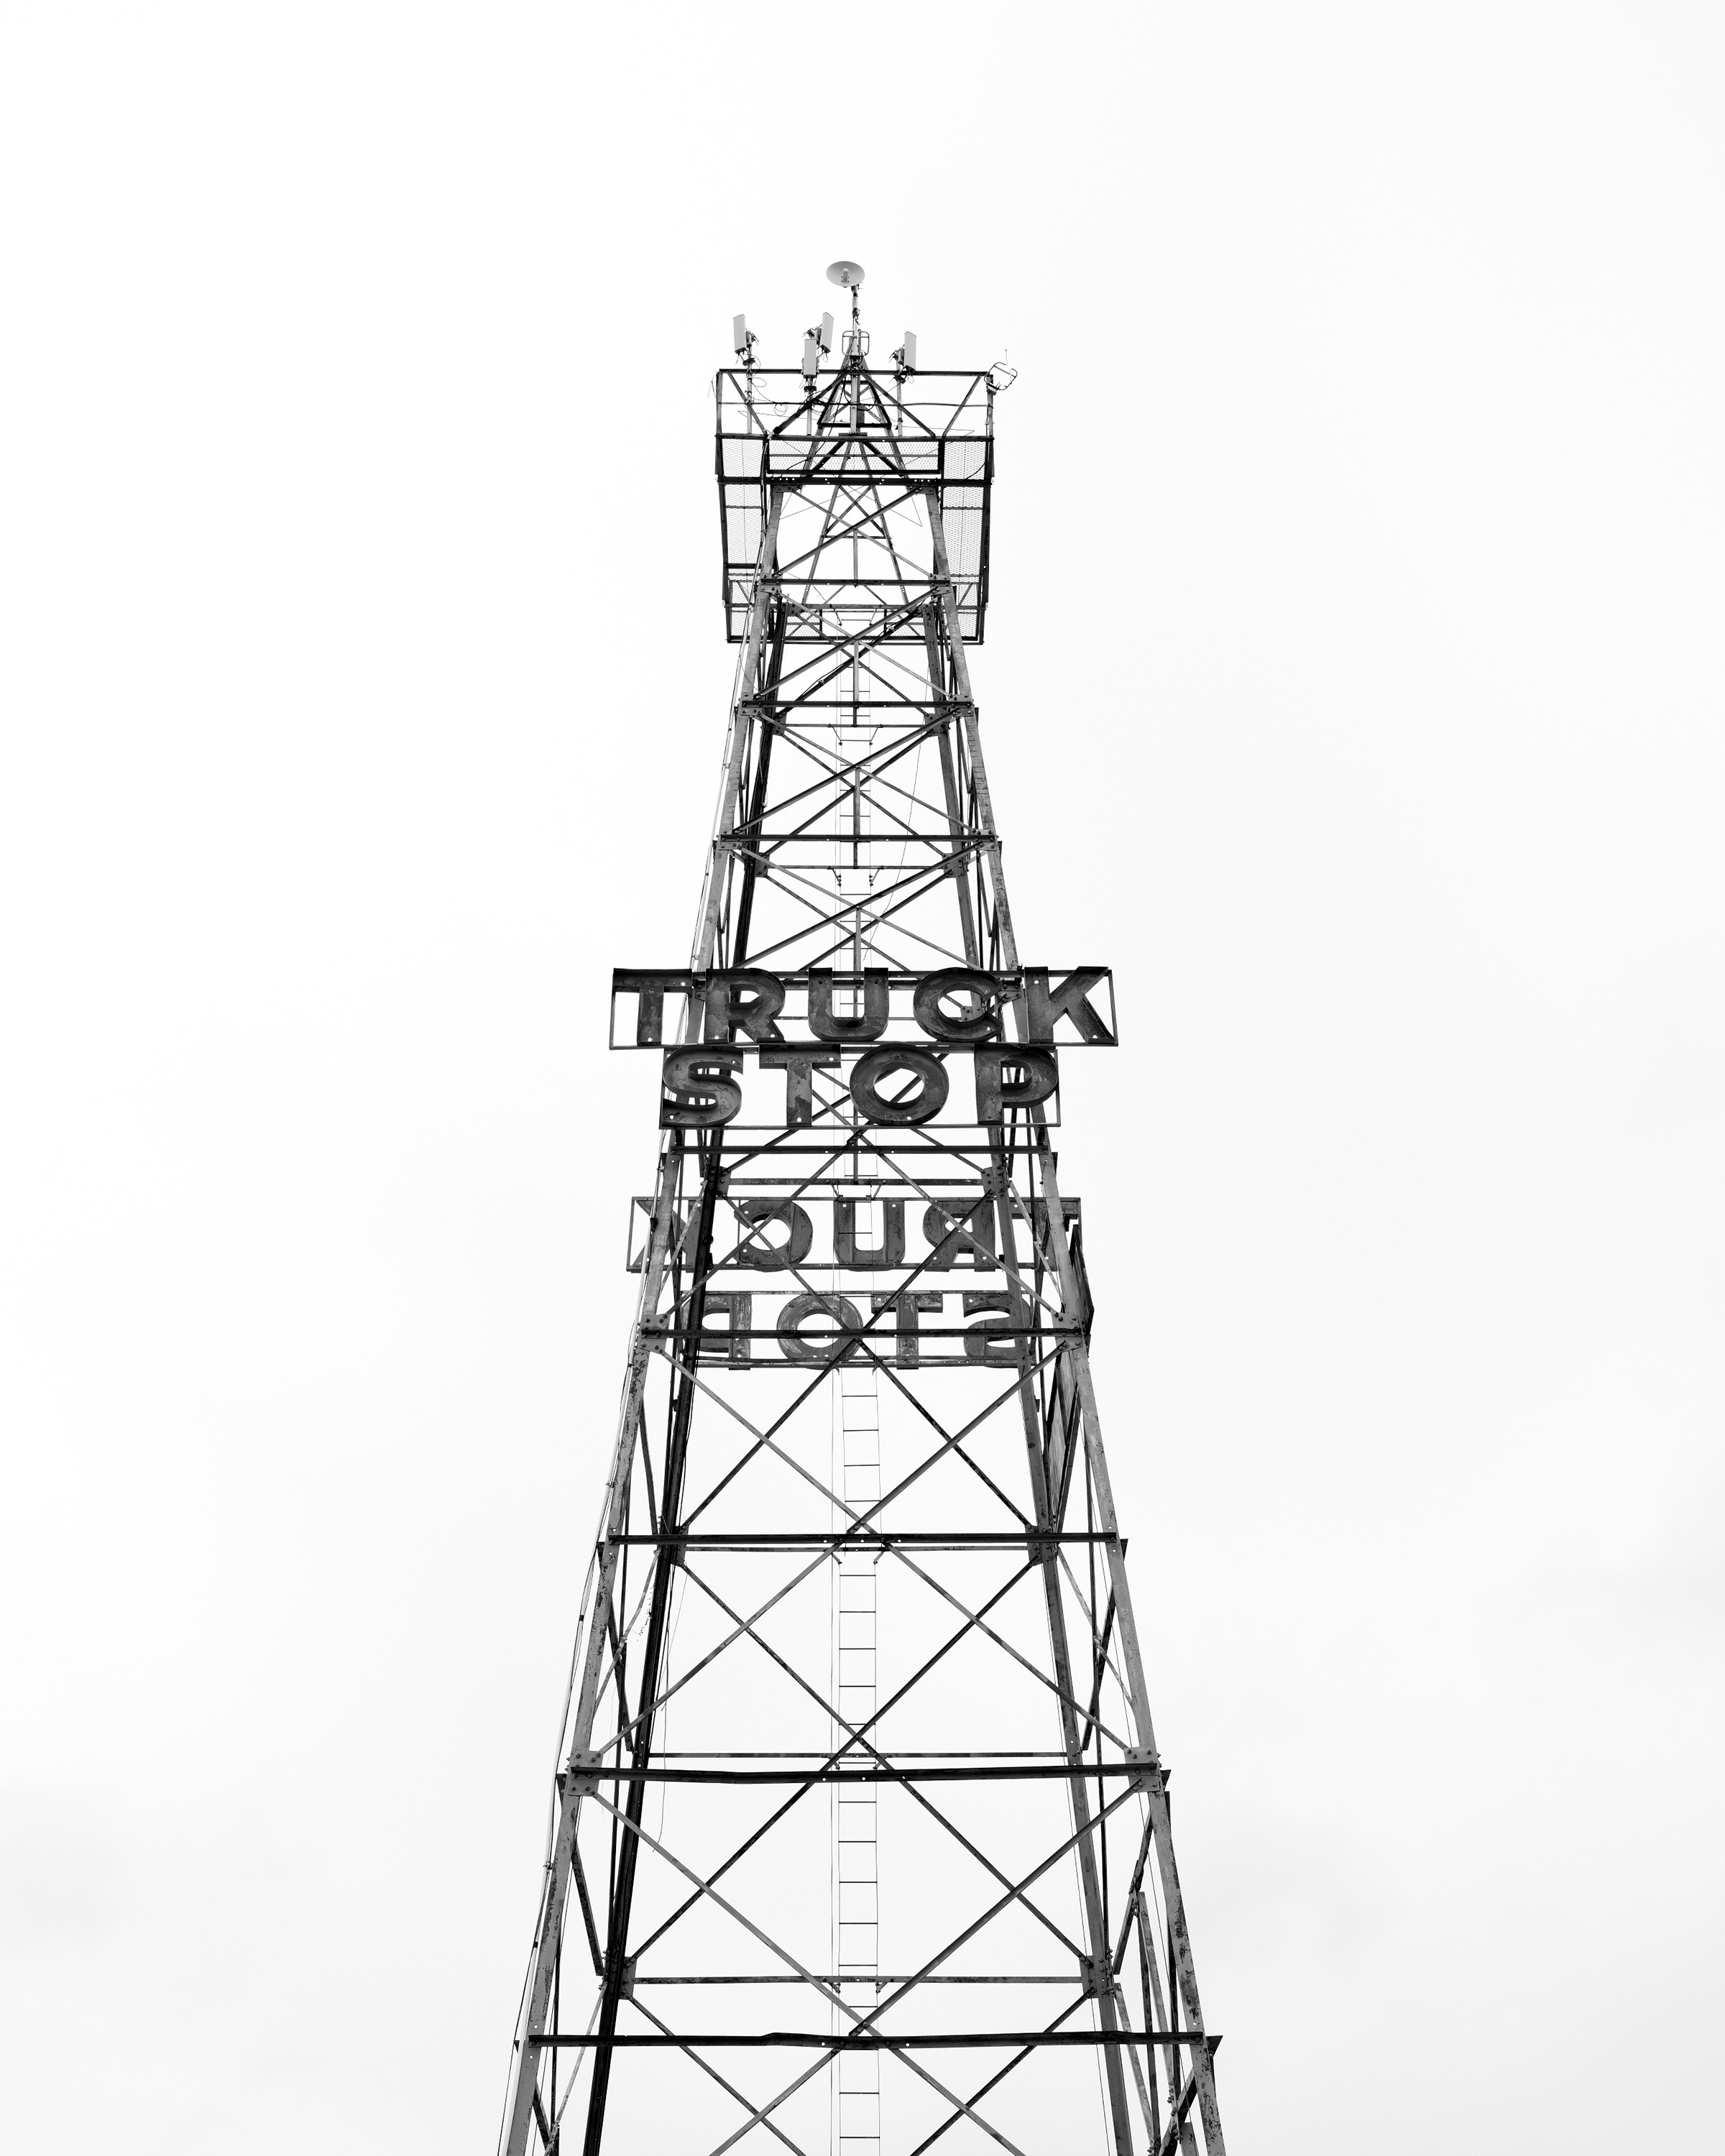 Photograph of an oil rig from a Texas truck stop